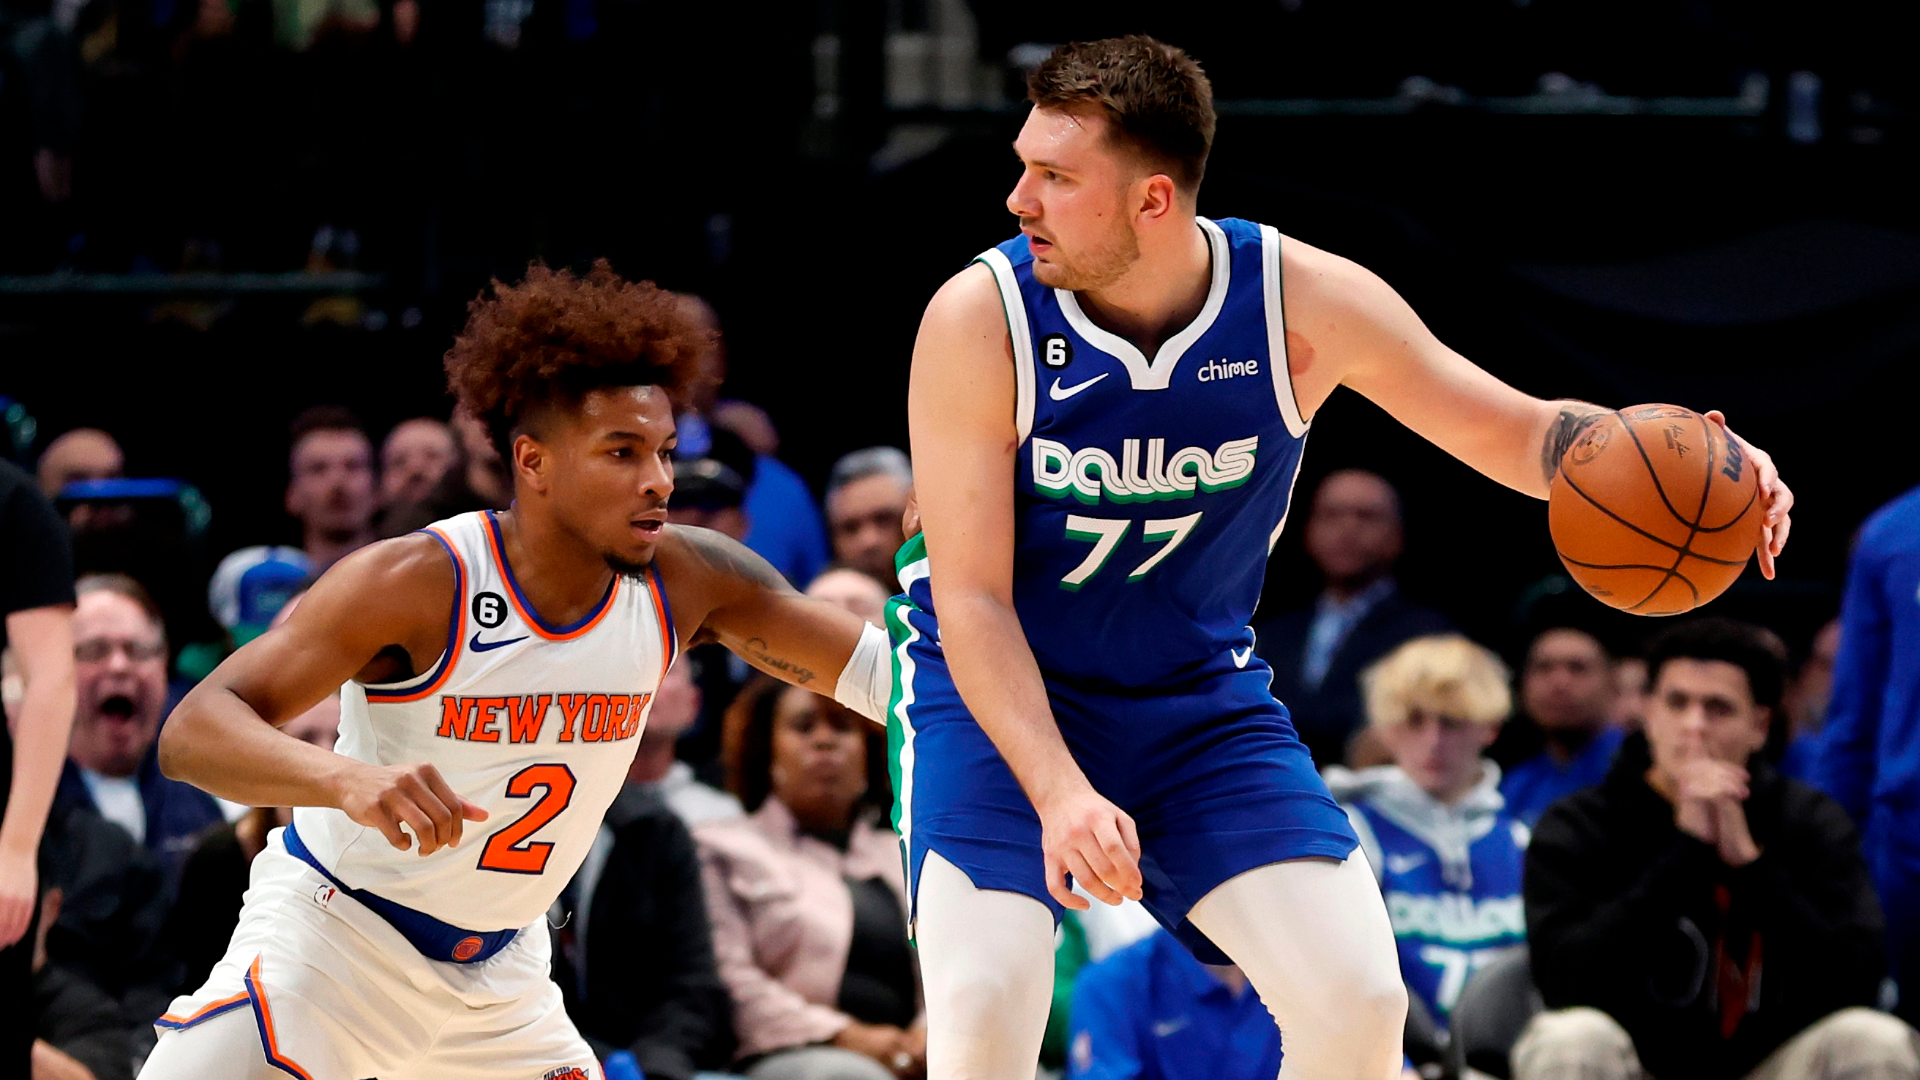 Mavericks star Luka Doncic rewrites the record books with historic 60-point triple-double